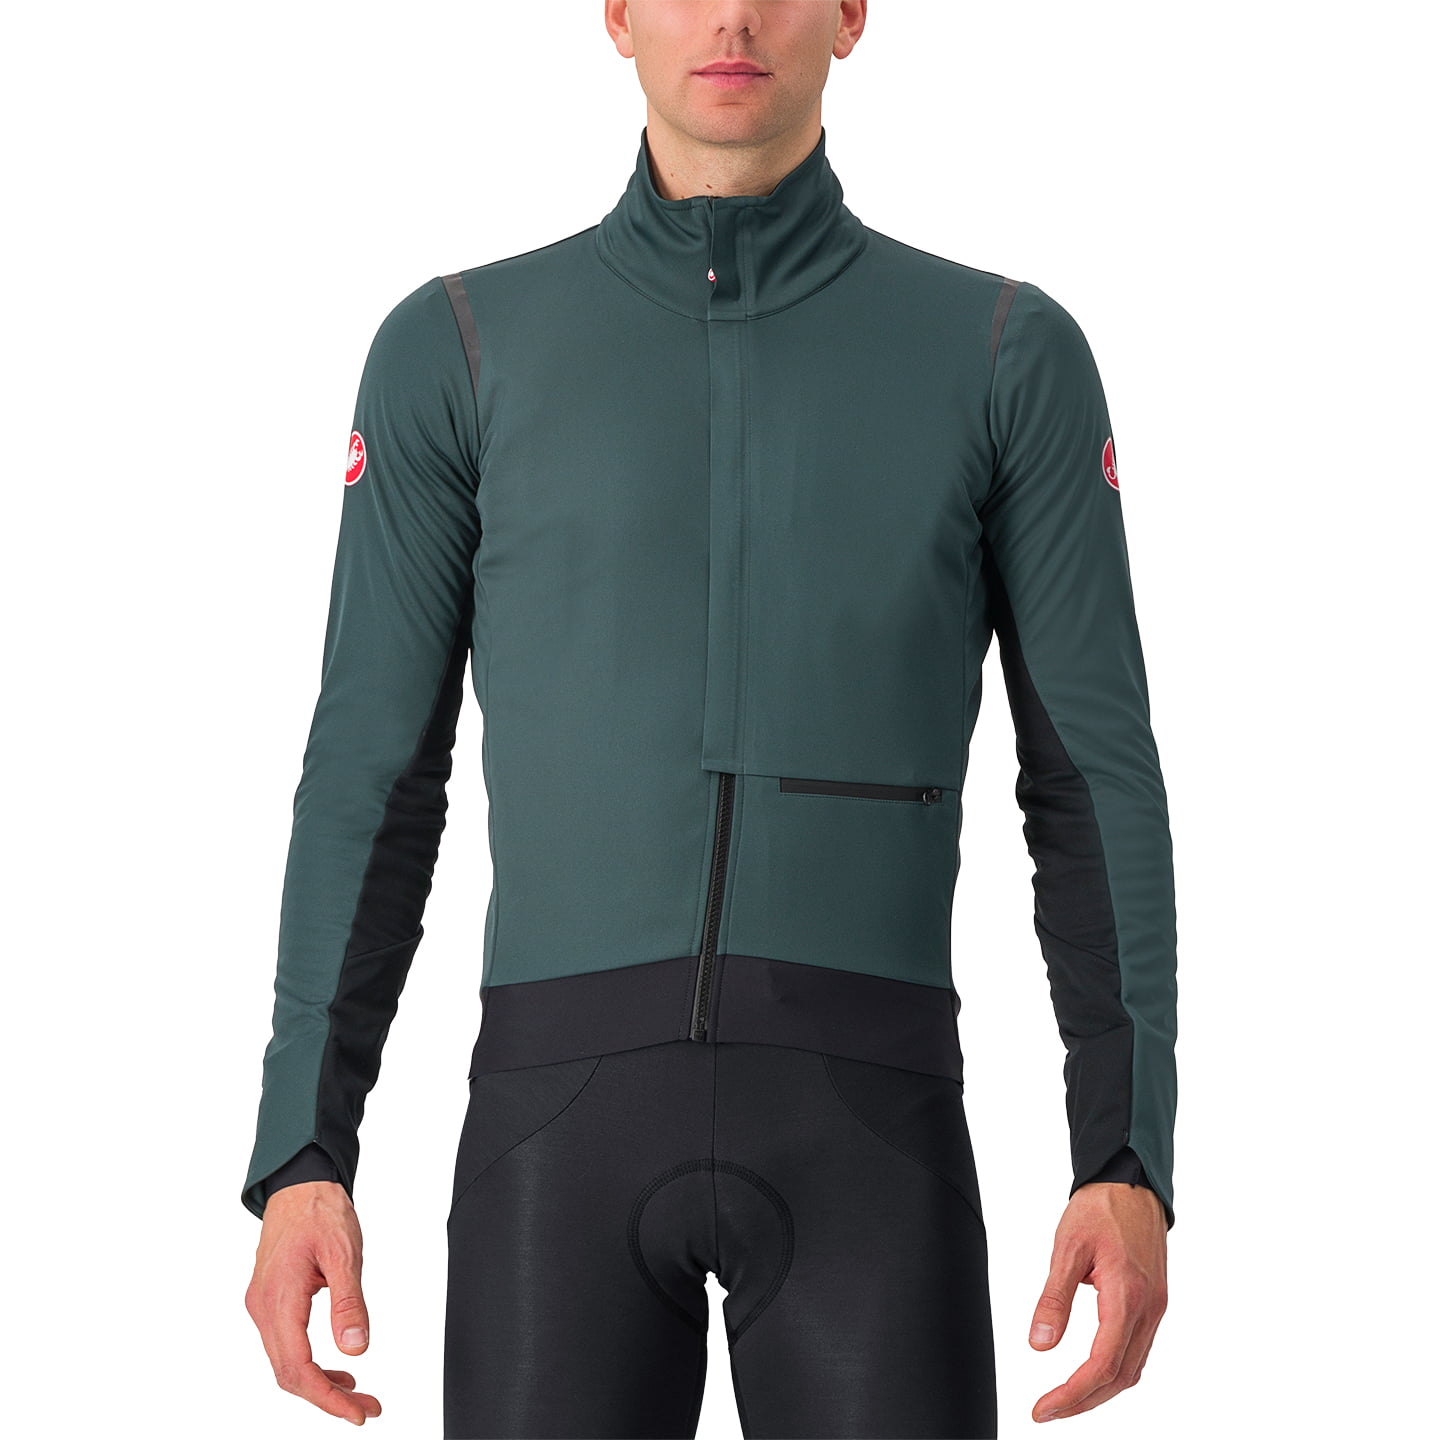 CASTELLI Winter Jacket Alpha Doppio RoS Thermal Jacket, for men, size M, Cycle jacket, Cycling clothing